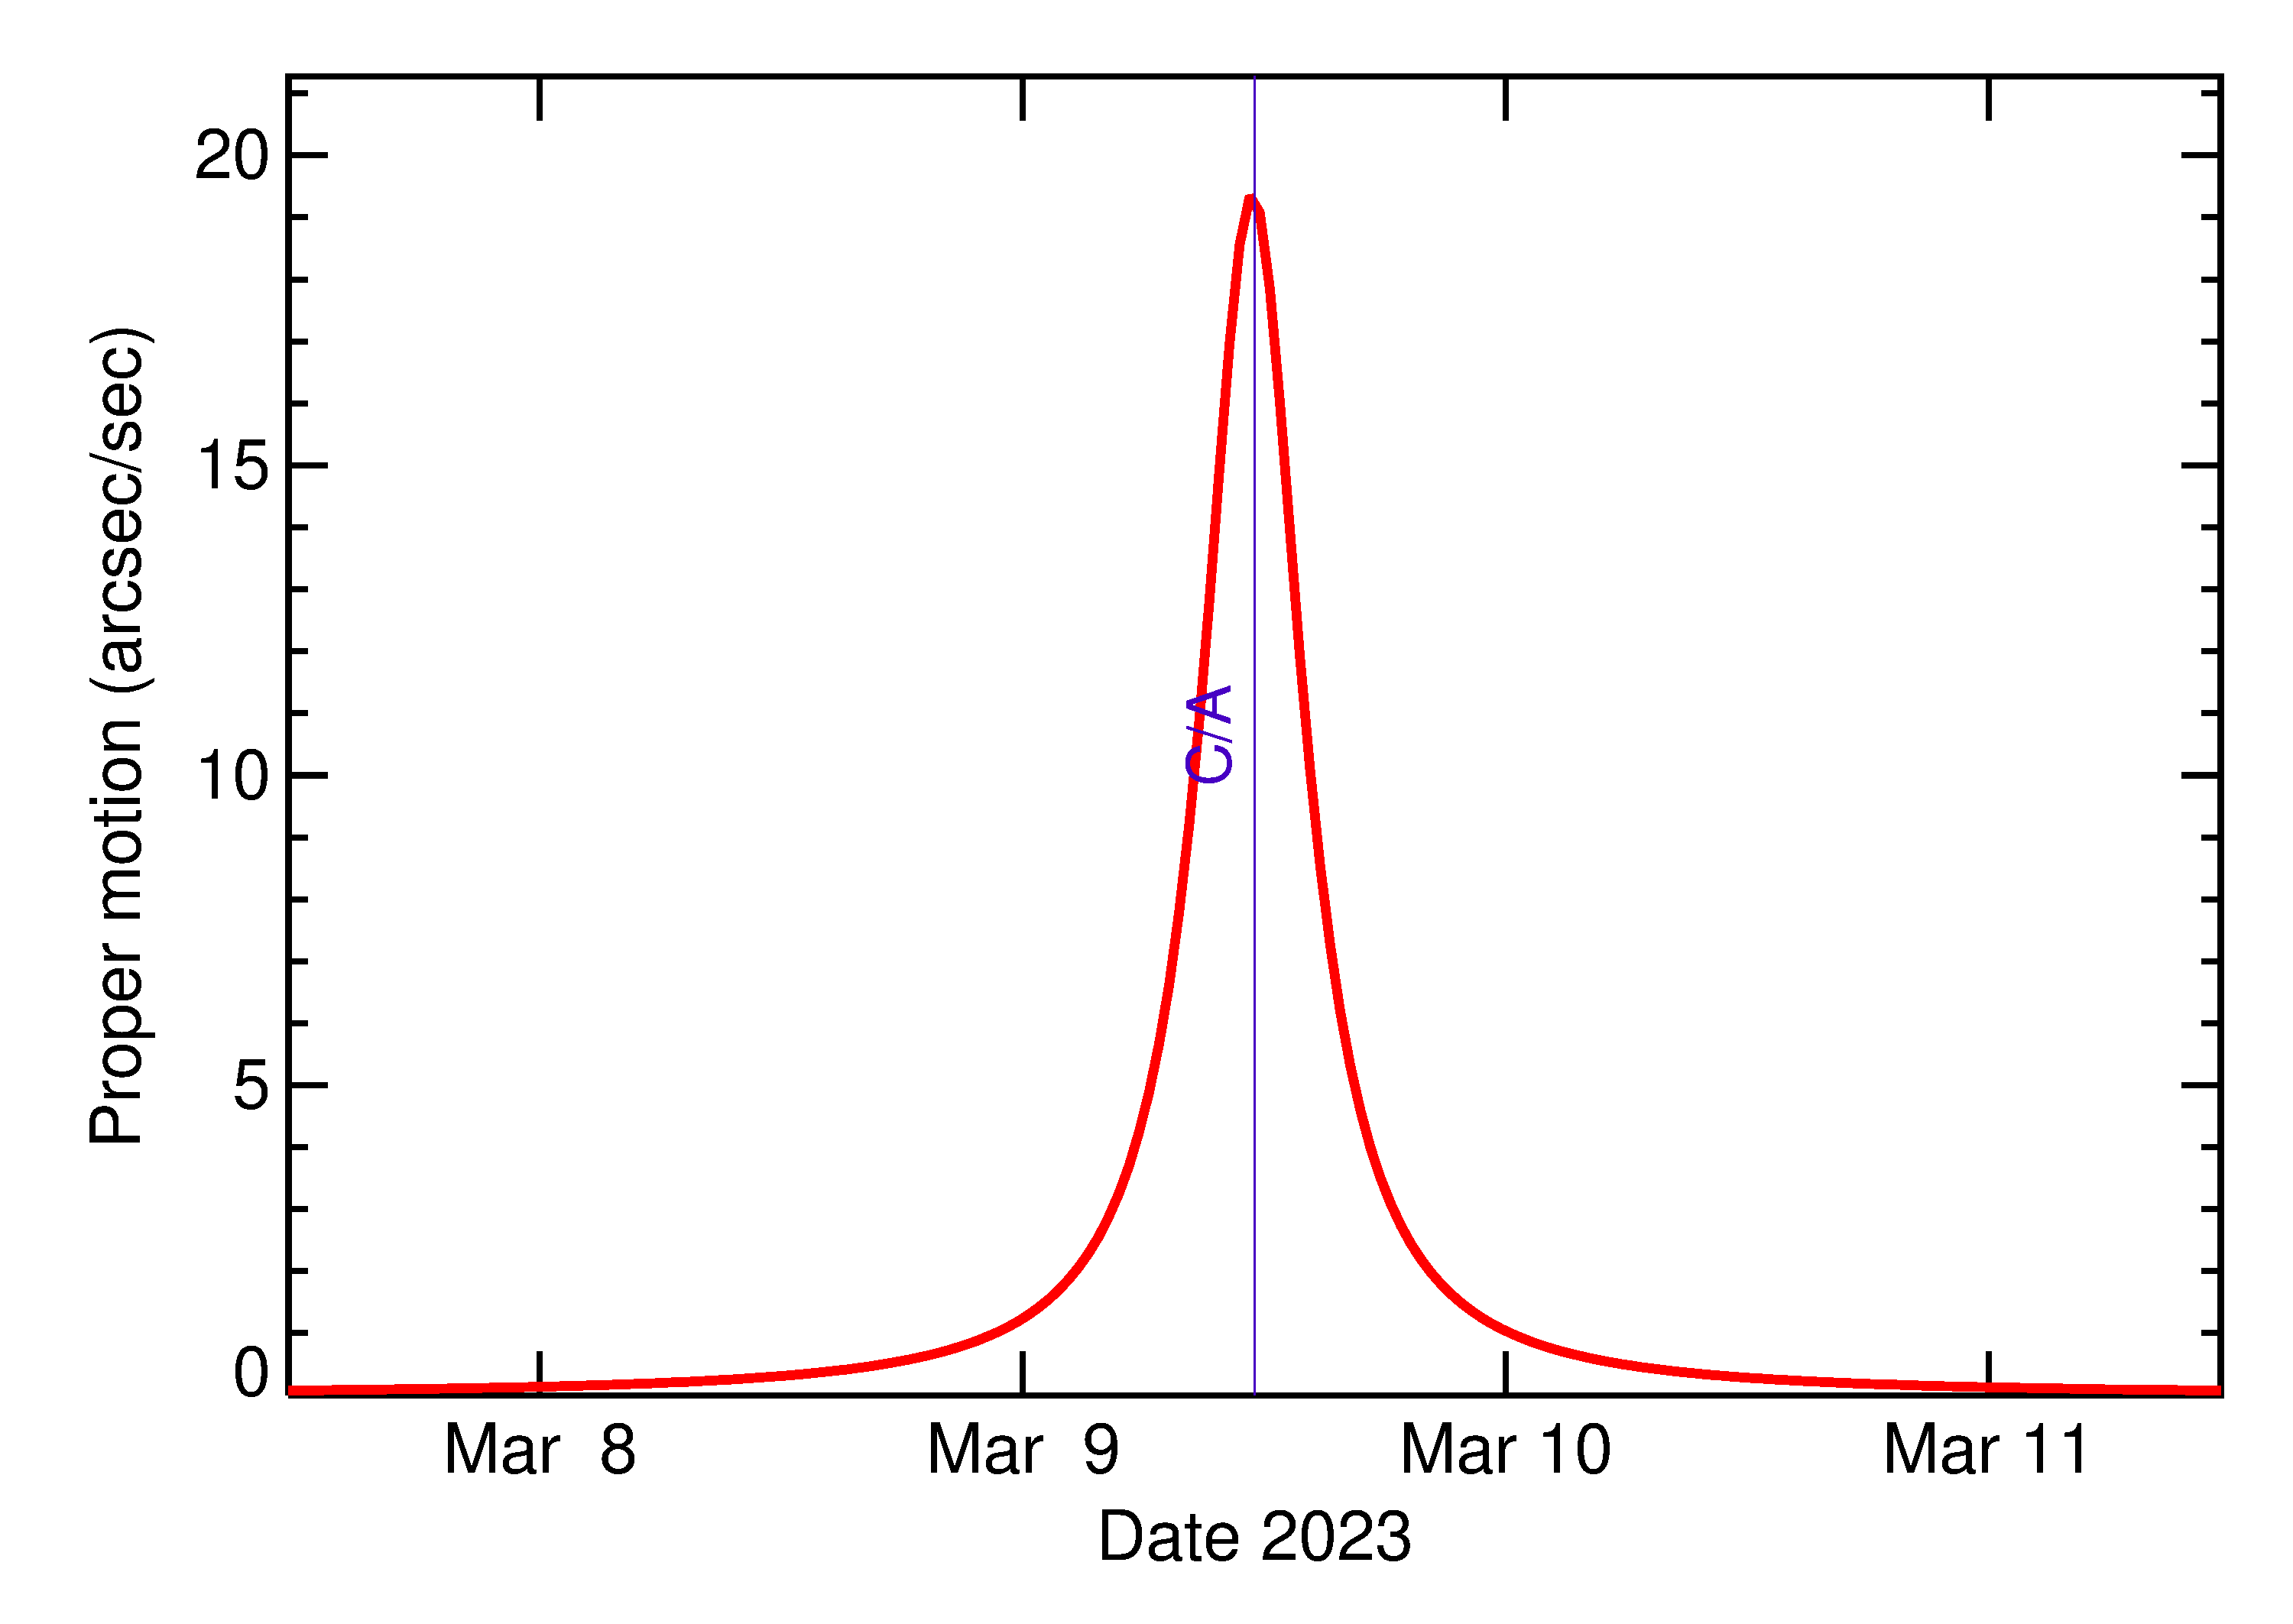 Proper motion rate of 2023 EN in the days around closest approach